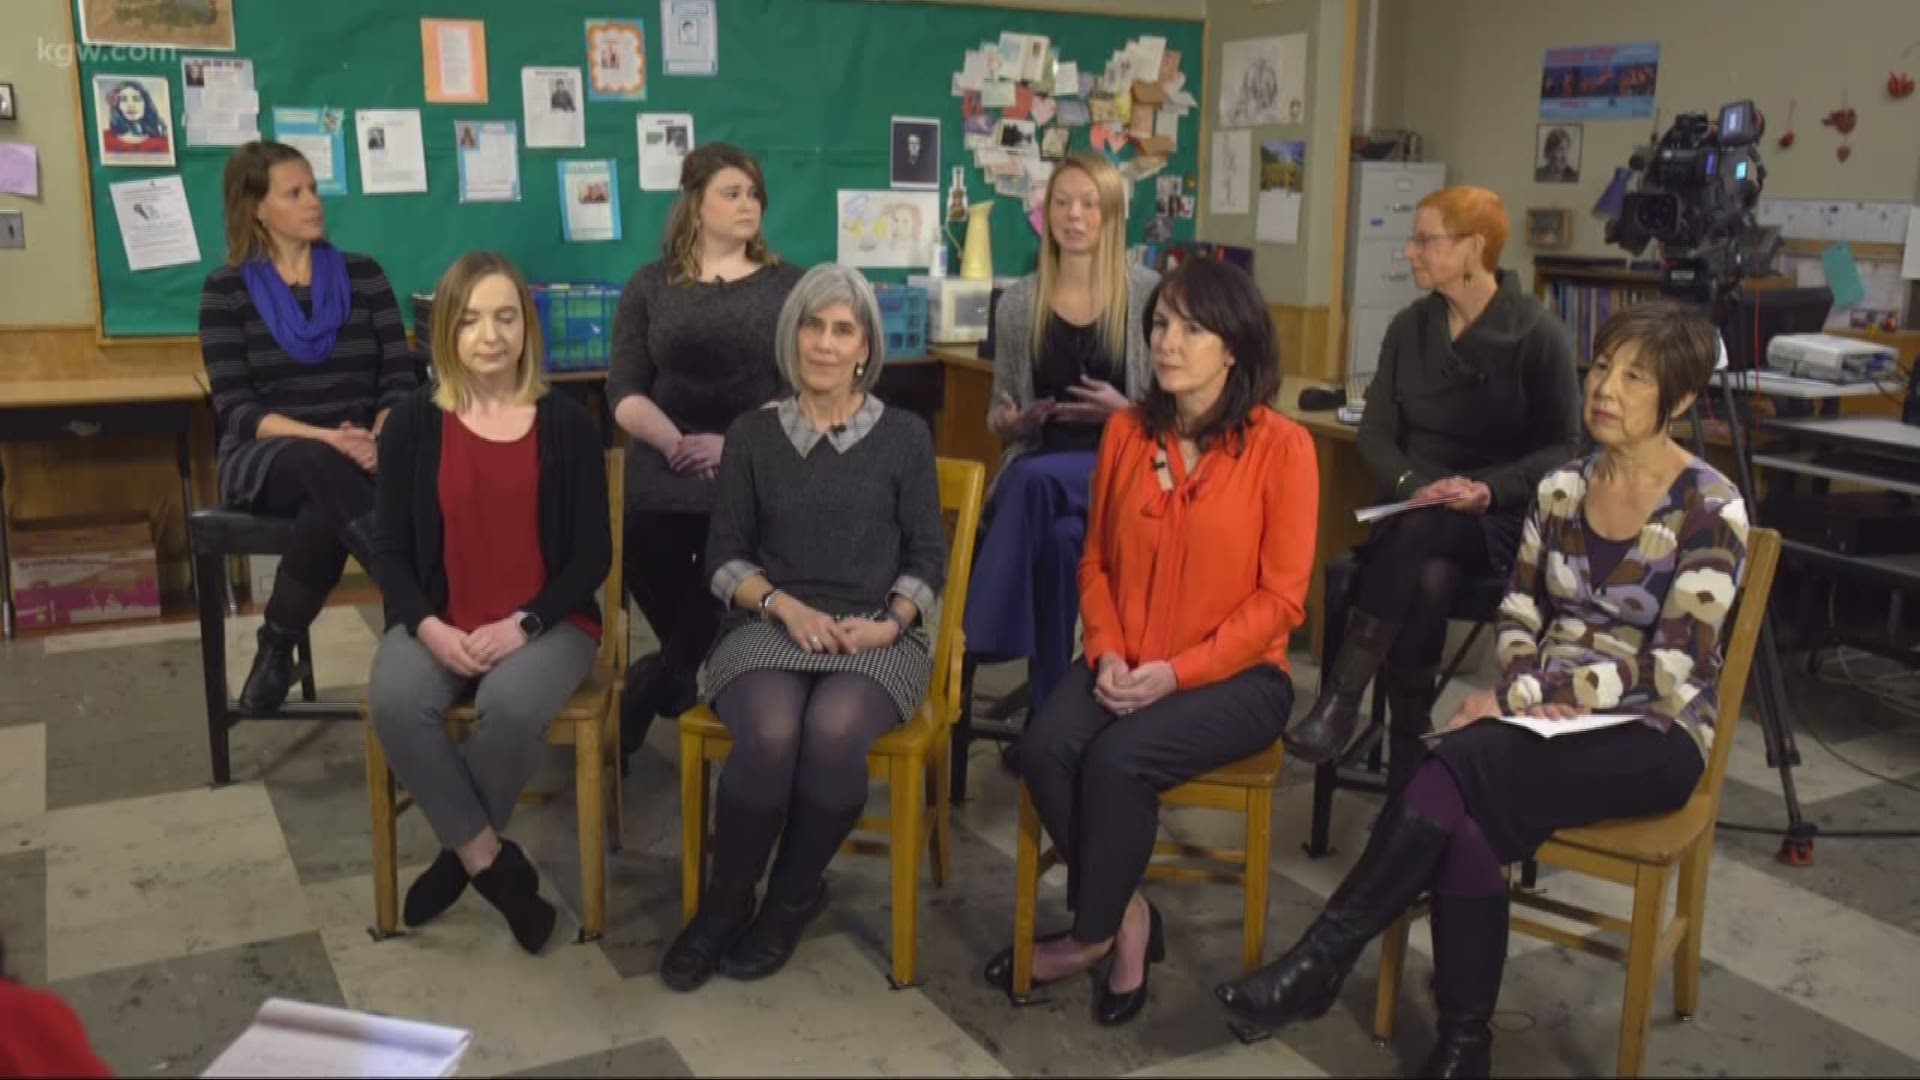 Teachers sit down with KGW investigative reporter Cristin Severance to air concerns about violent children in classrooms.